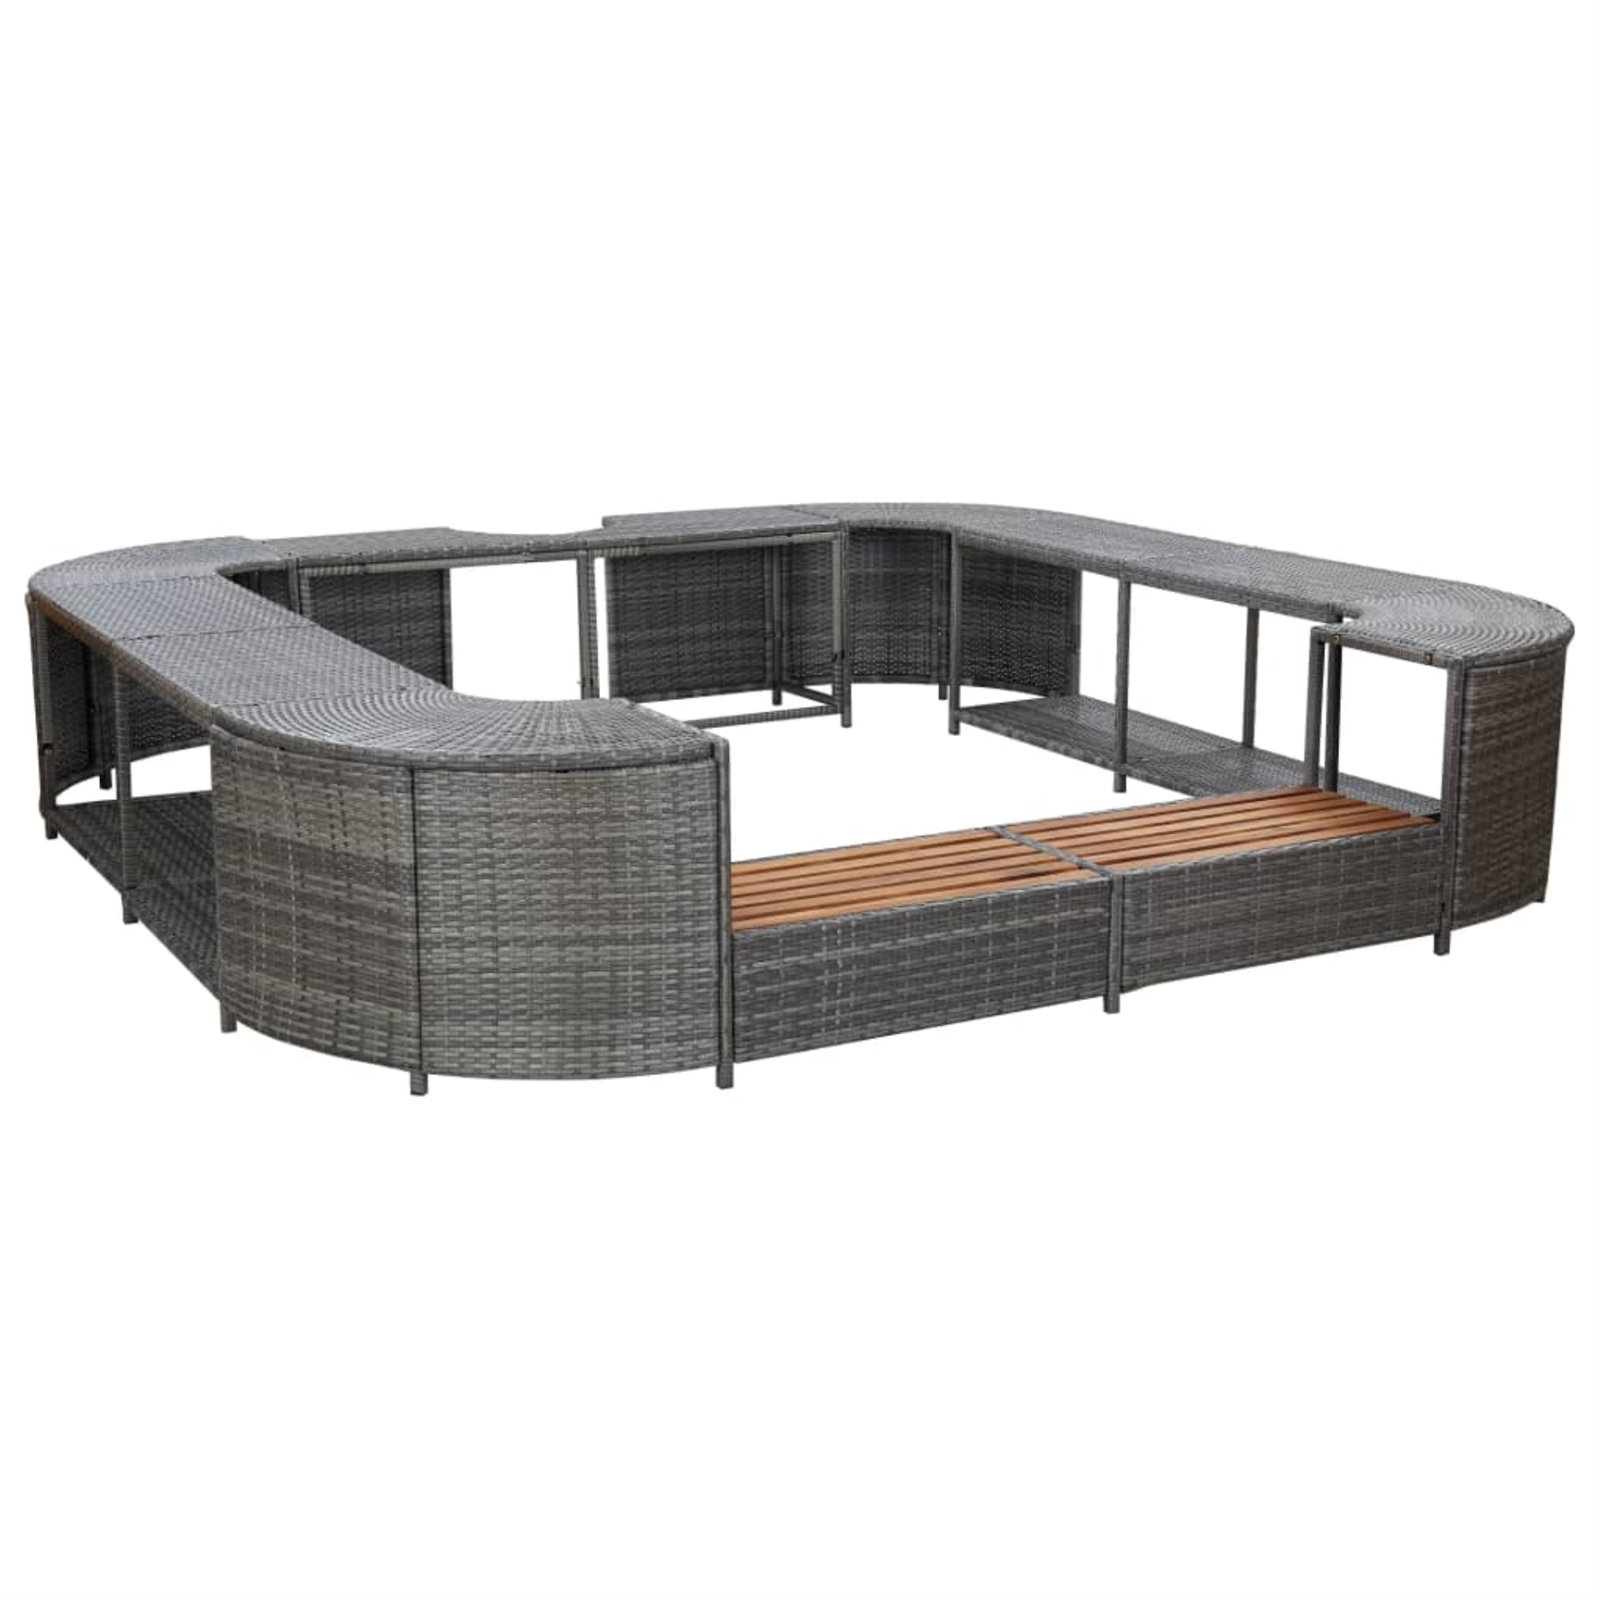 Bless international Odonell Square Spa Surround Poly Rattan Hot Tub Garden Sun Enclosure